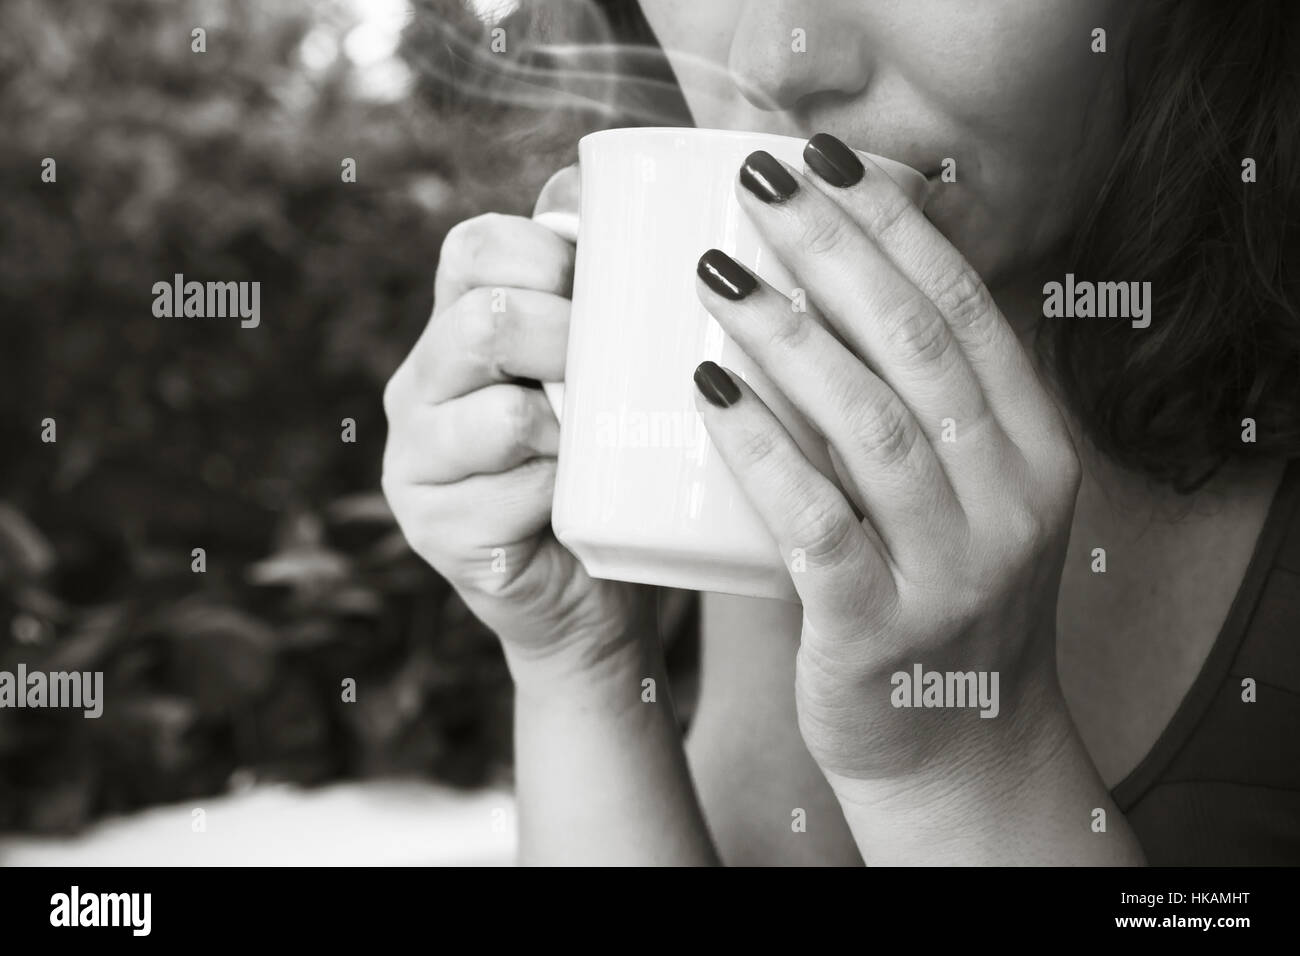 Young woman drinks coffee from white cup. Close-up black and white photo, selective focus on hands Stock Photo